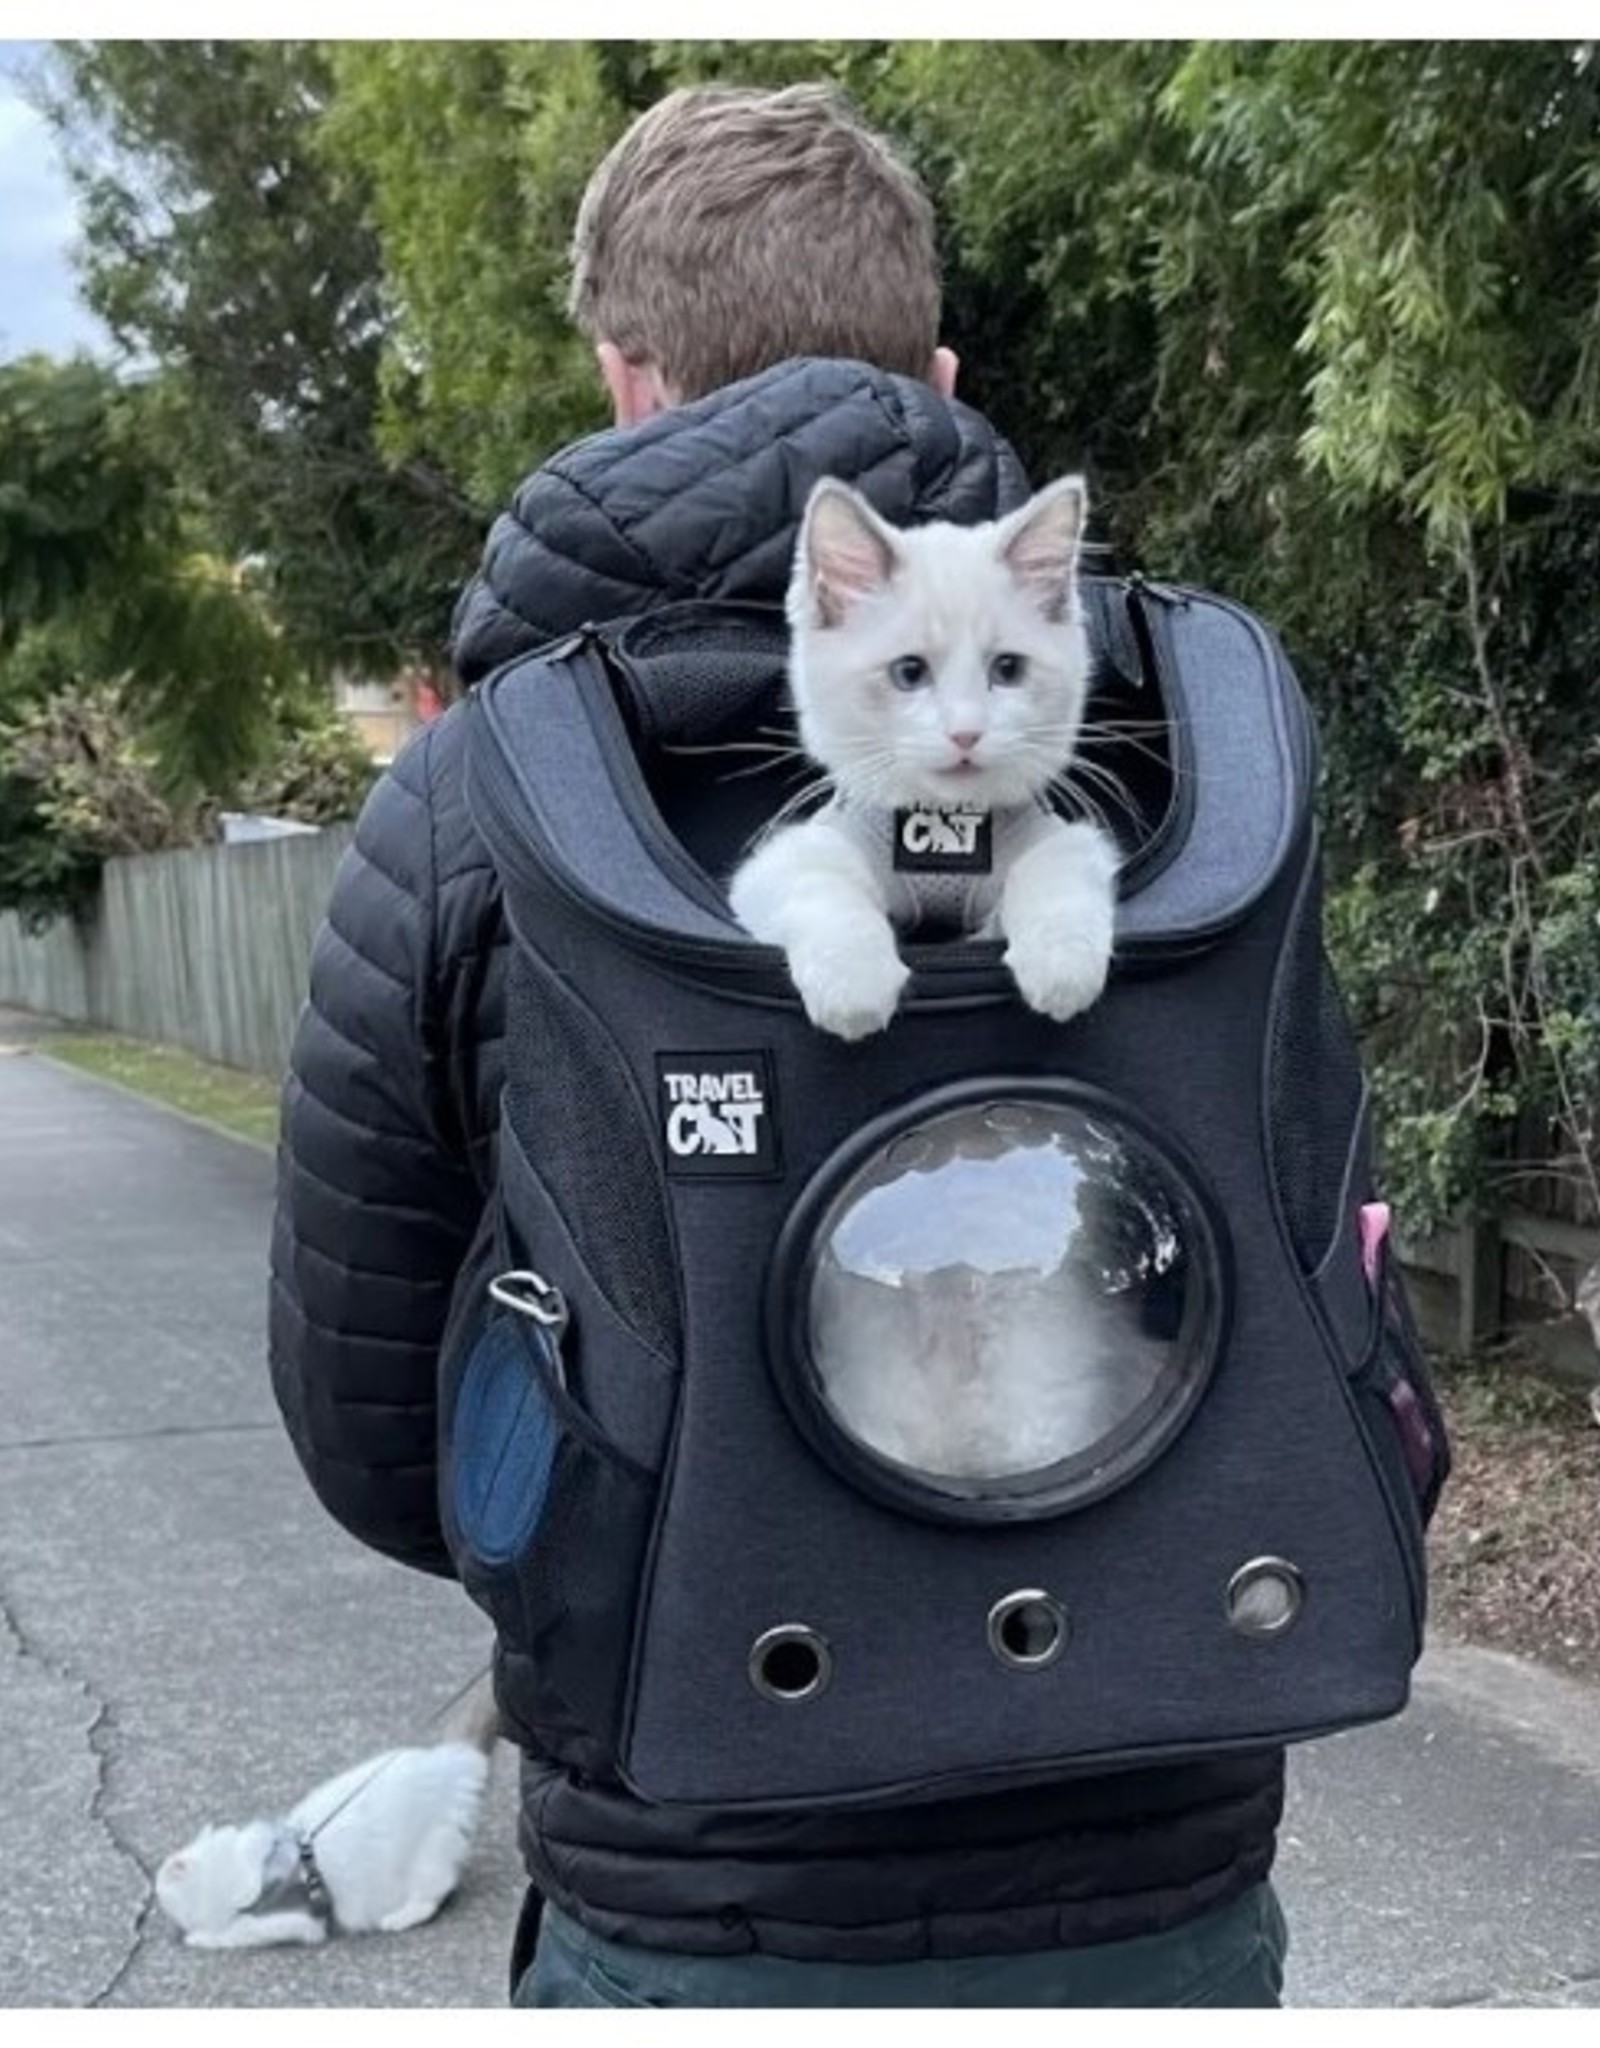 Travel Cat The Fat Cat Backpack - Bubble Carrier